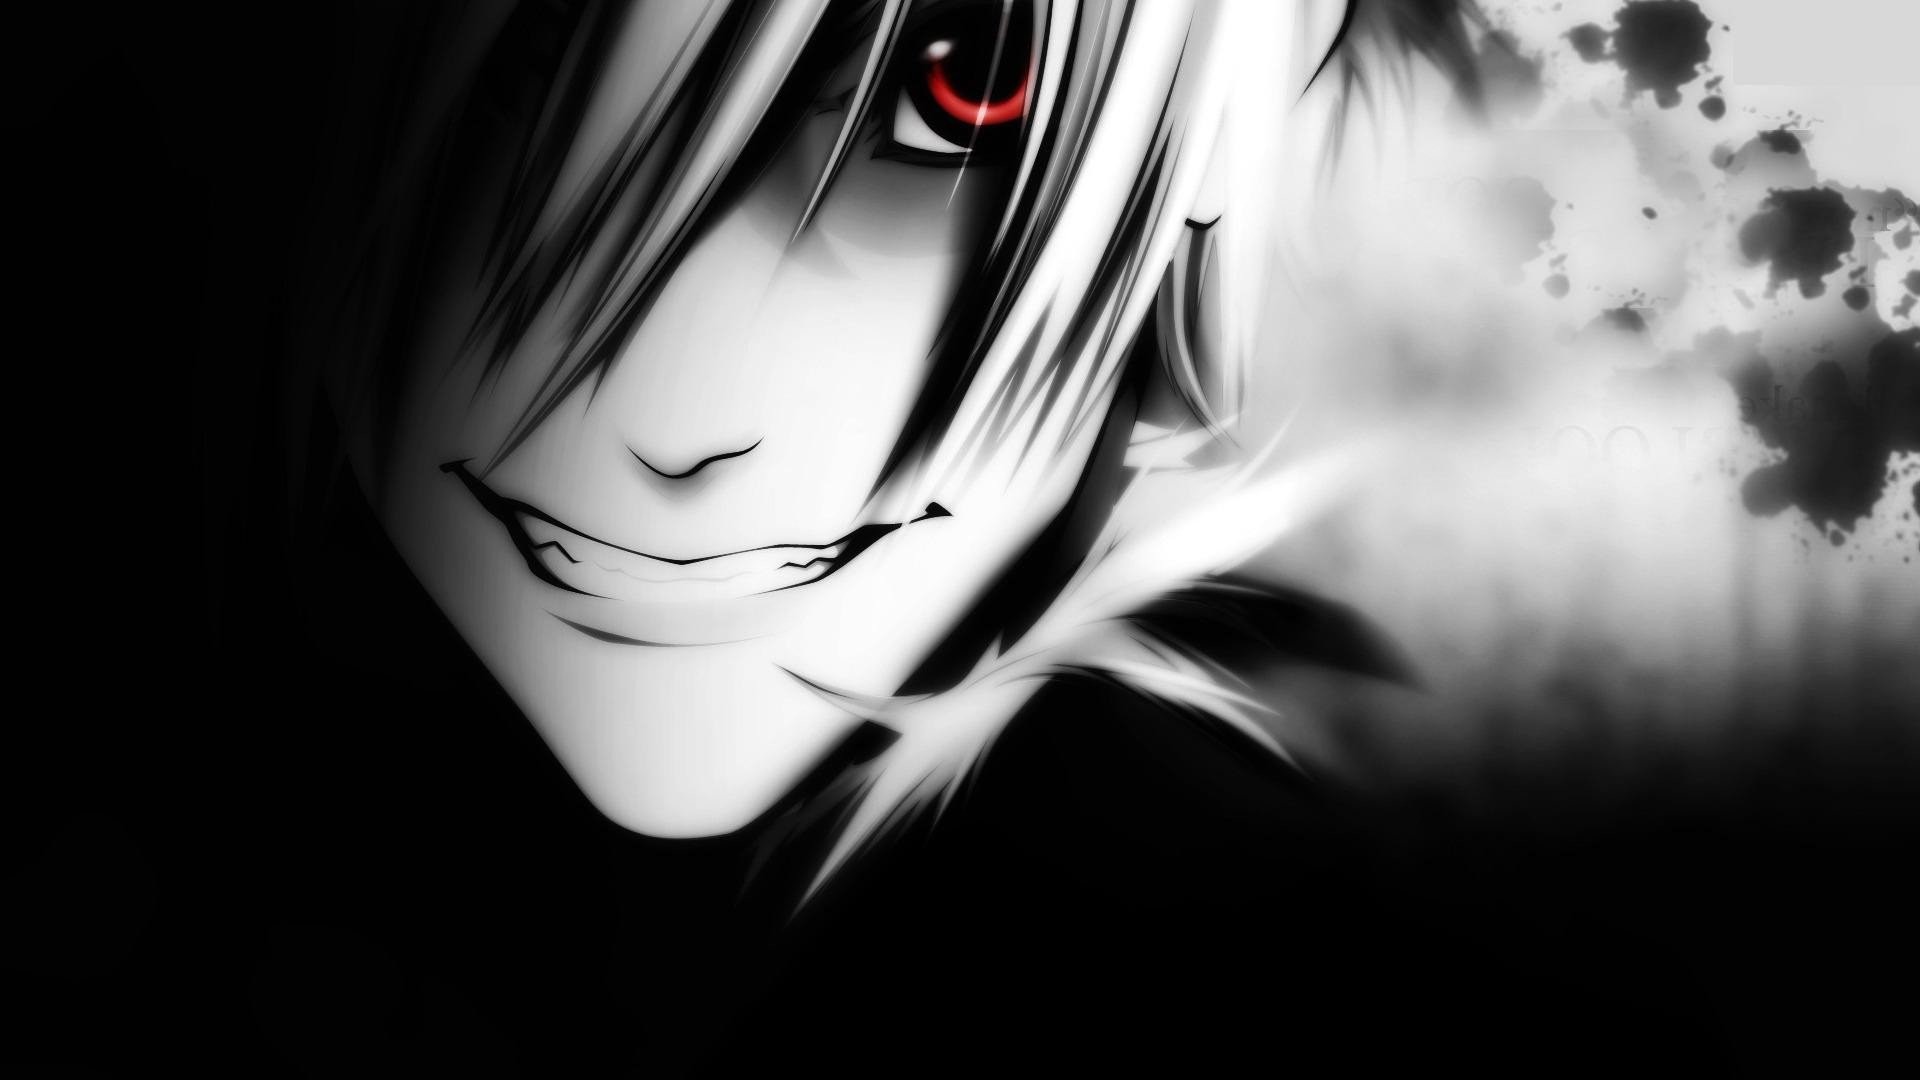 1920x1080, Death Note Black And White Red Eyes Anime - Black And White Anime  - 1920x1080 Wallpaper 